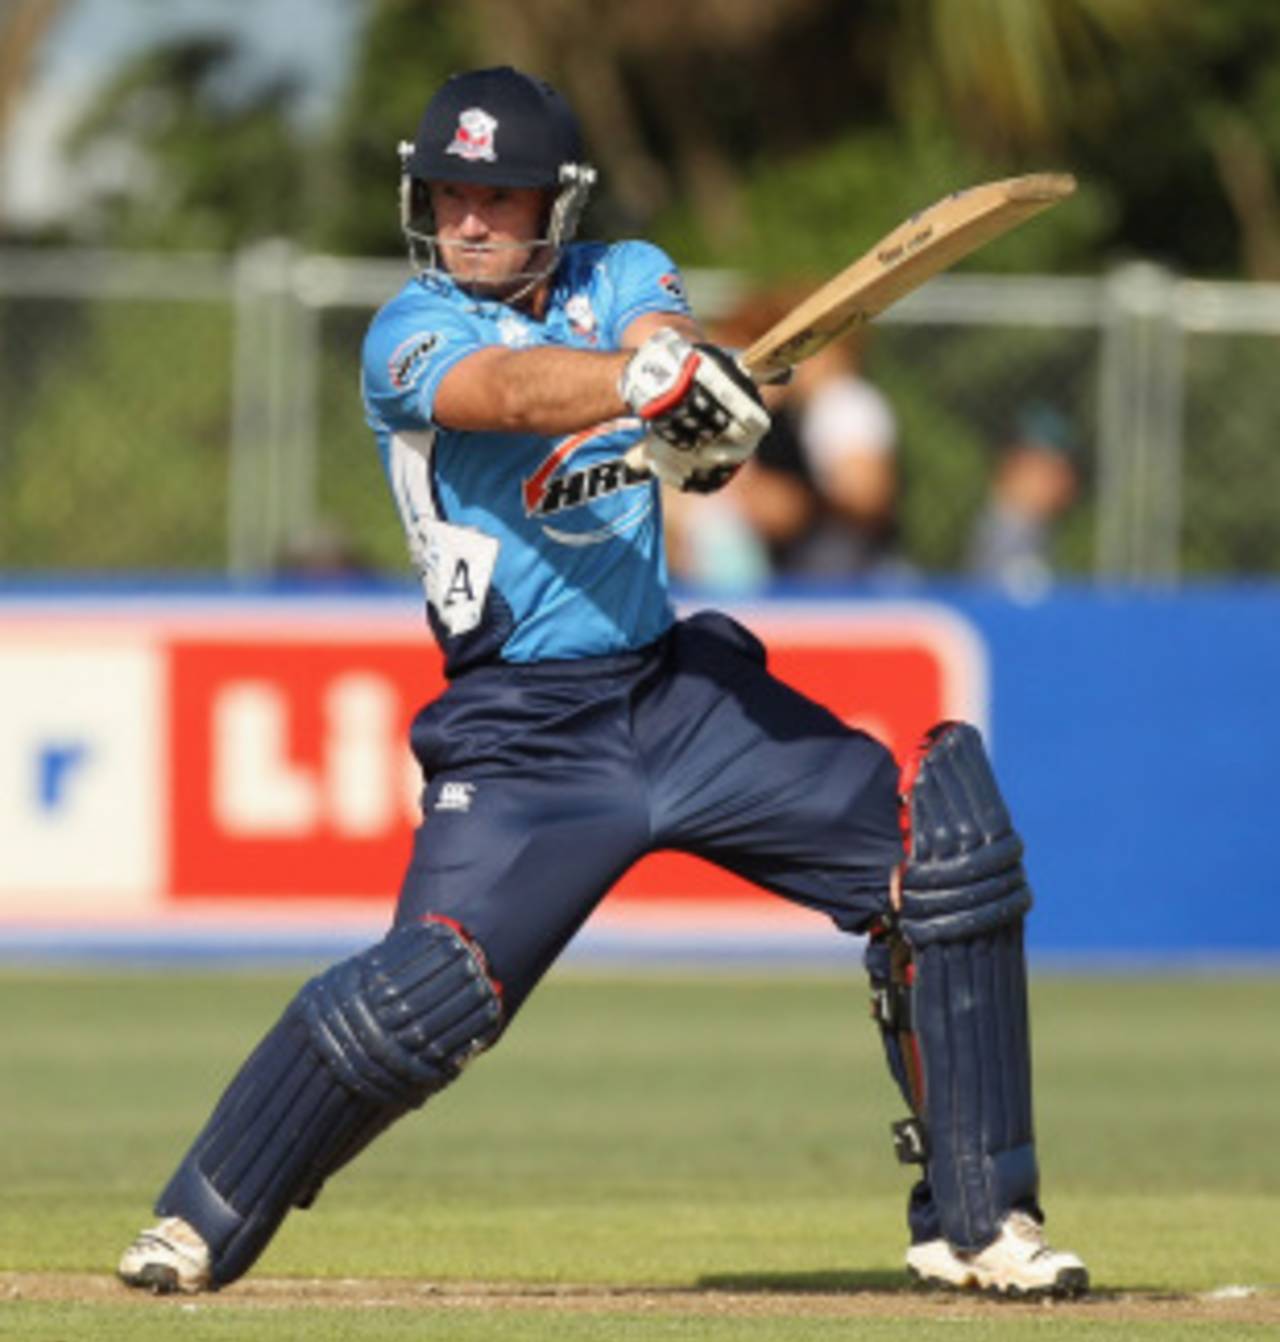 Gareth Hopkins hits one square on the off side, Auckland v Canterbury, Auckland, HRV Cup 2010-11, December 21, 2010